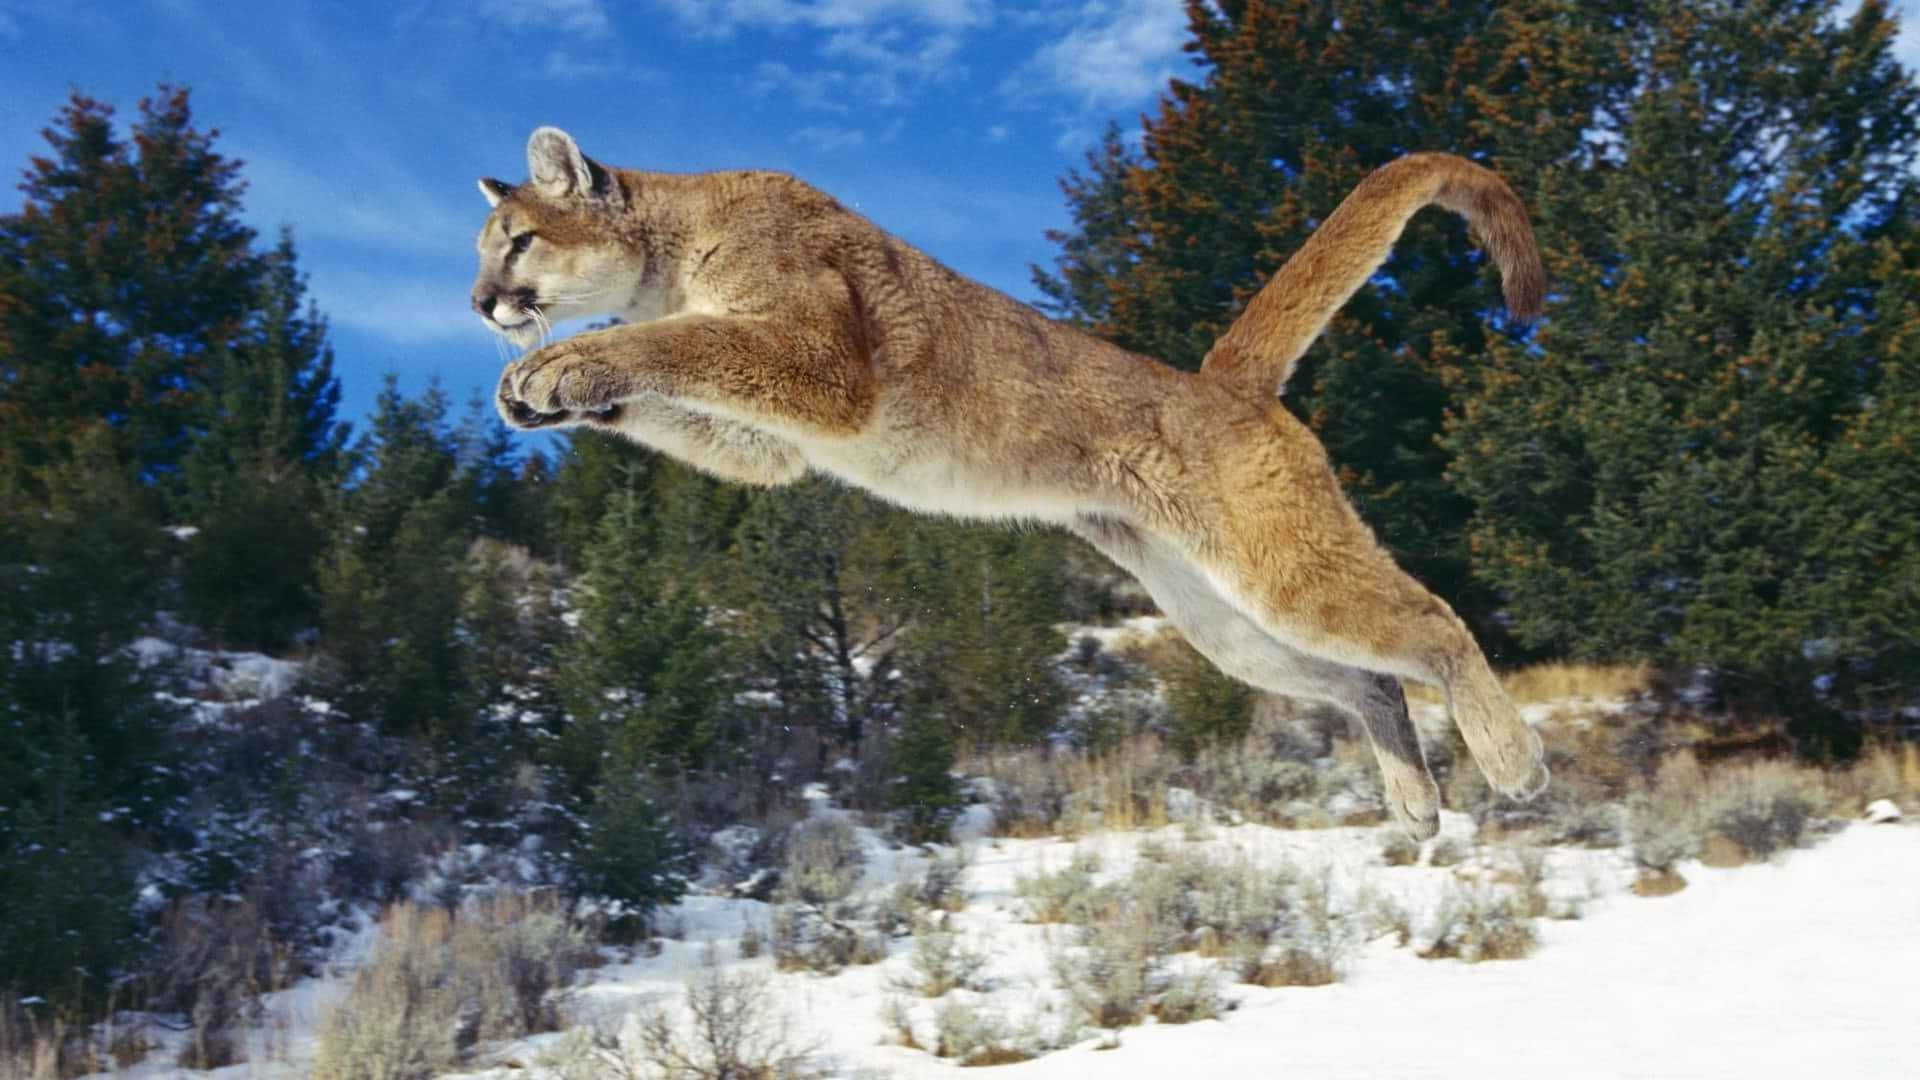 Caption: Majestic Cougar In Its Natural Habitat Background